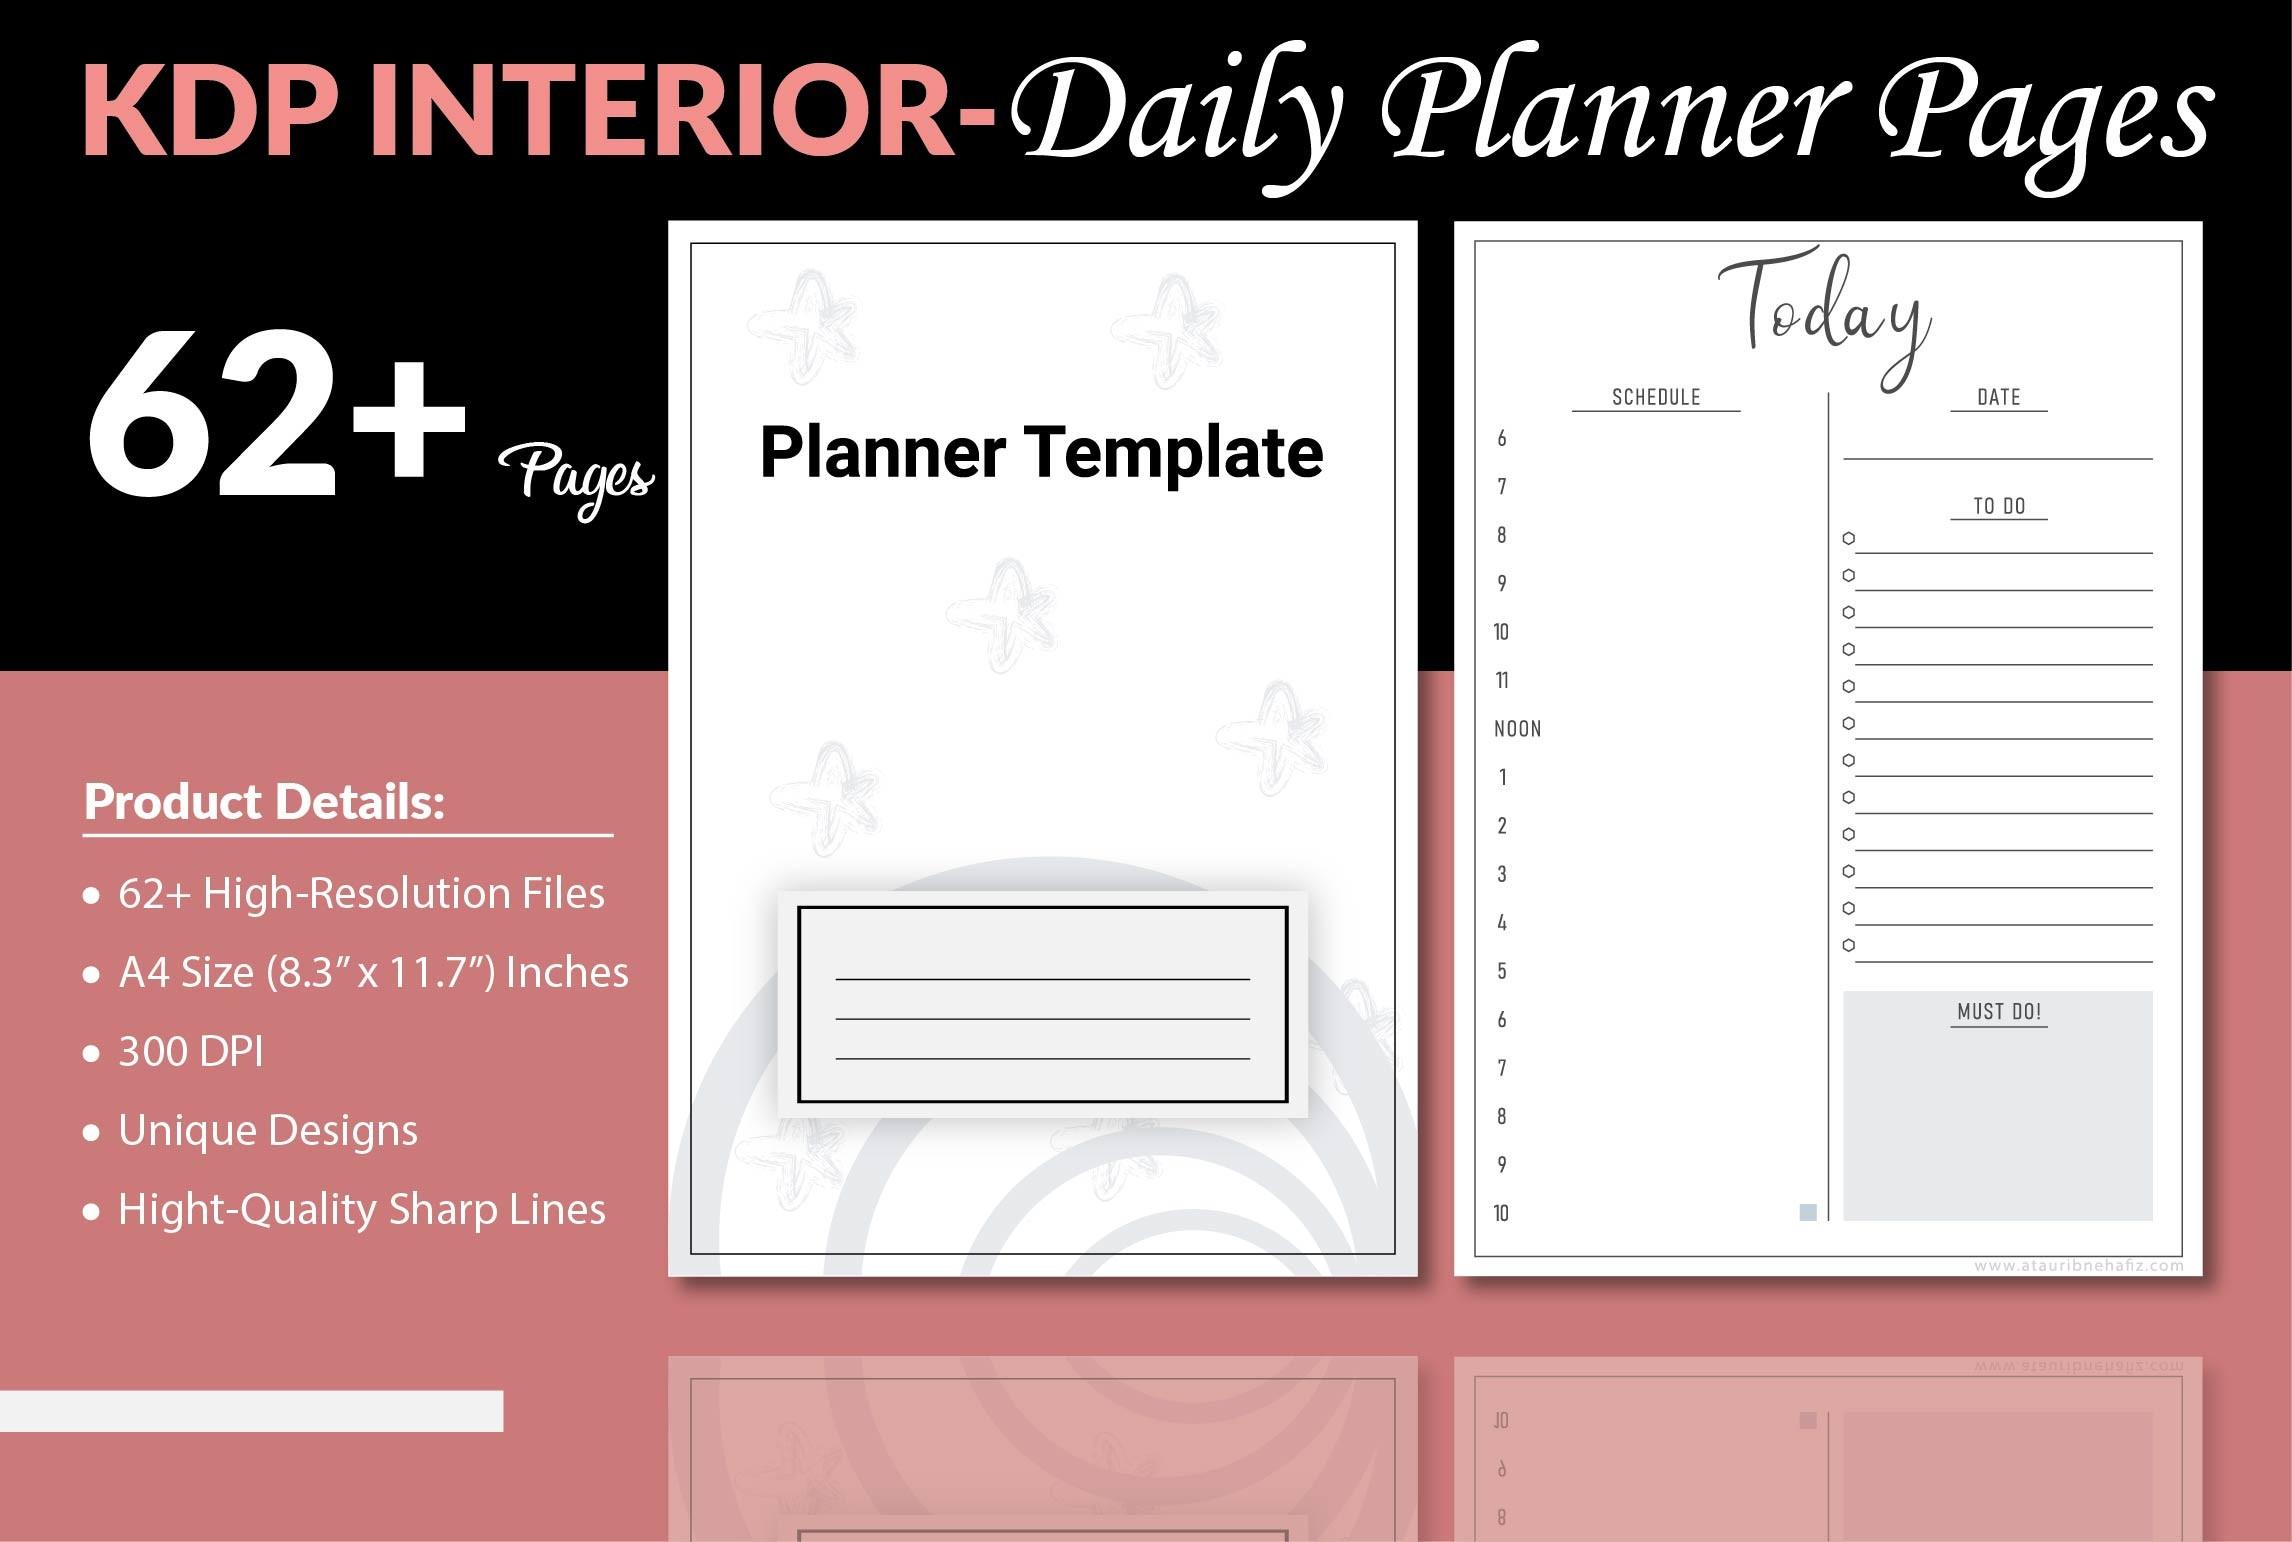 Daily Planner Pages - KDP Interior